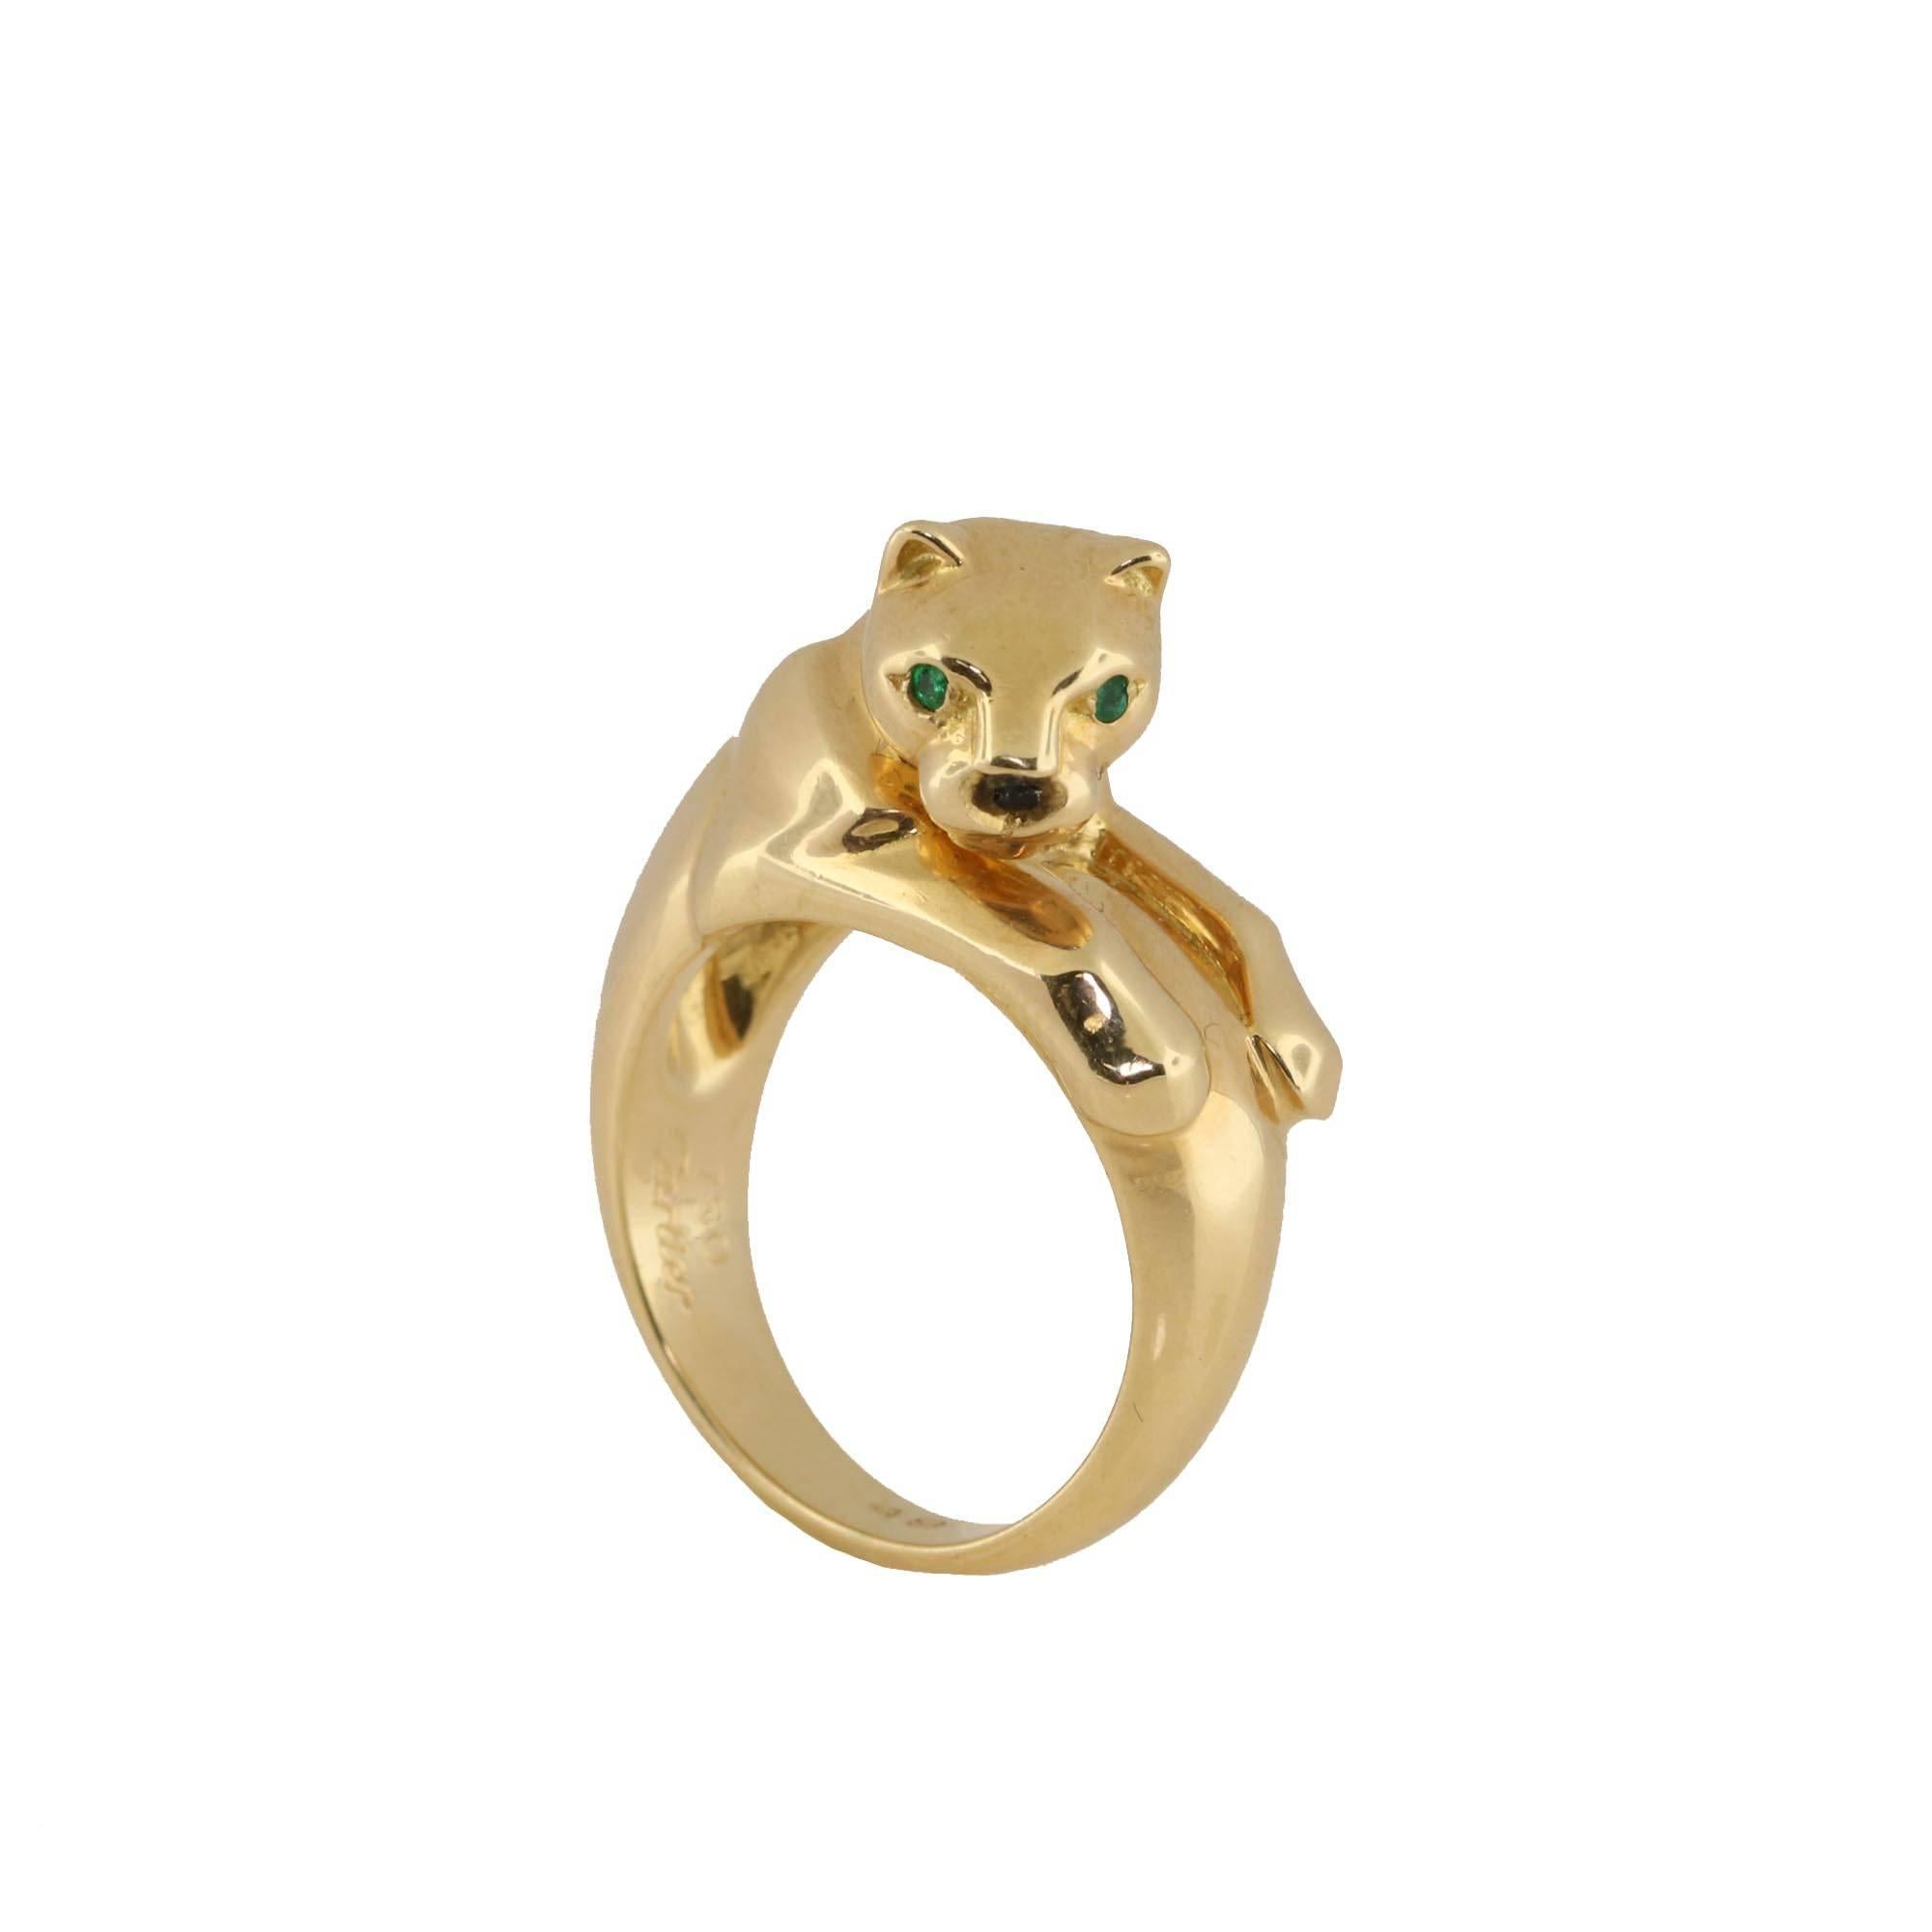 Perfect ring for the Cartier lover in your life. Nothing says Cartier like the panther. This 18kt yellow gold ring is a size 4 3/4 which makes it an excellent pinky ring. The eyes on the panther are 2 natural green emeralds. 

It can also be sized